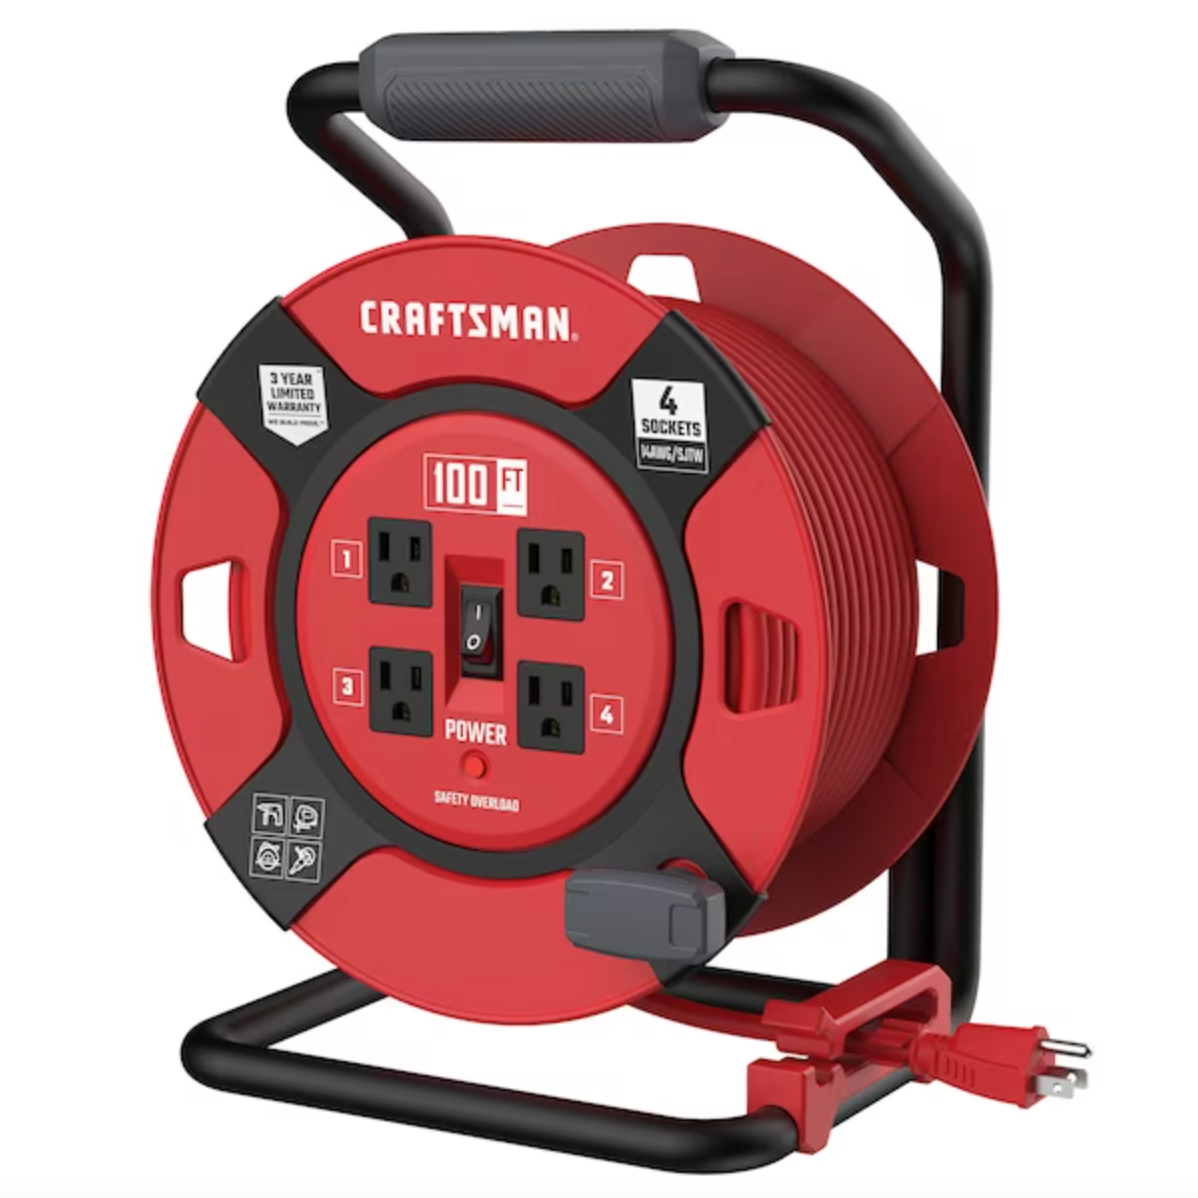 Today only: Take up to 30% off power cord reels at Lowe's - Clark Deals